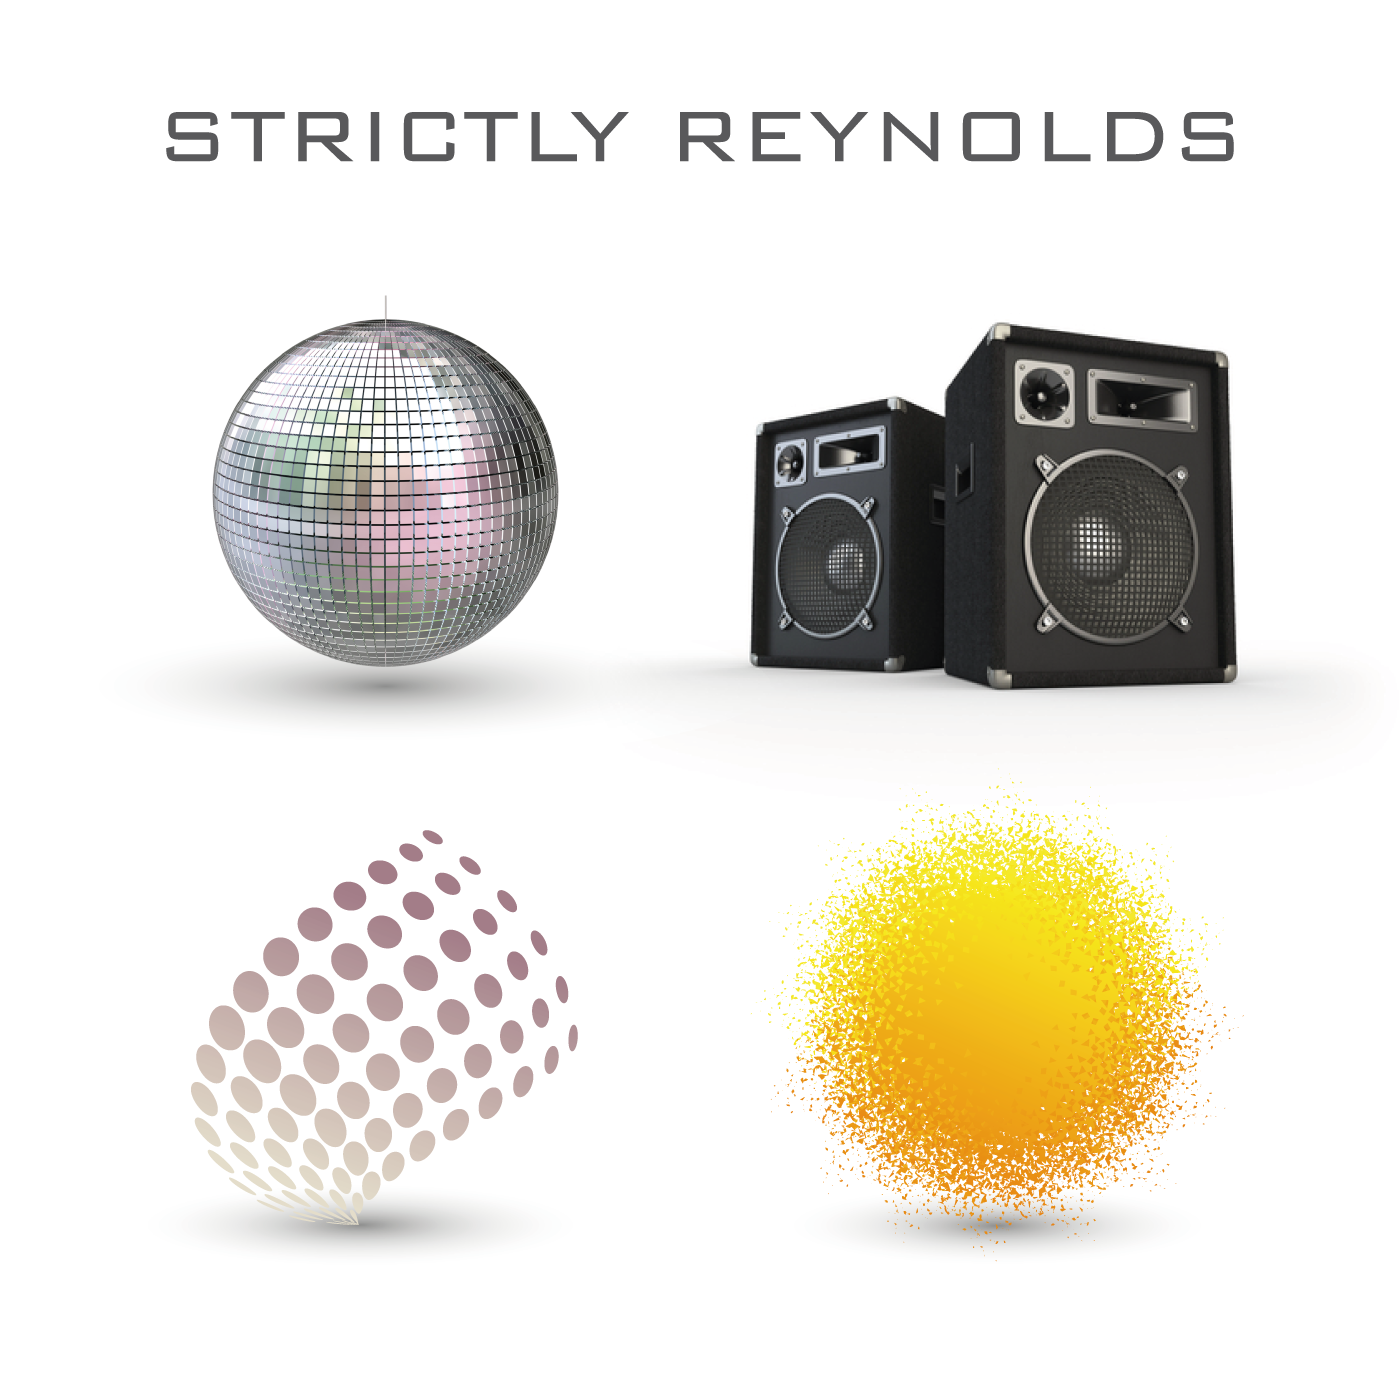 Strictly Reynolds House Mixes - #Beach #Chillout #Deep #Classic #House